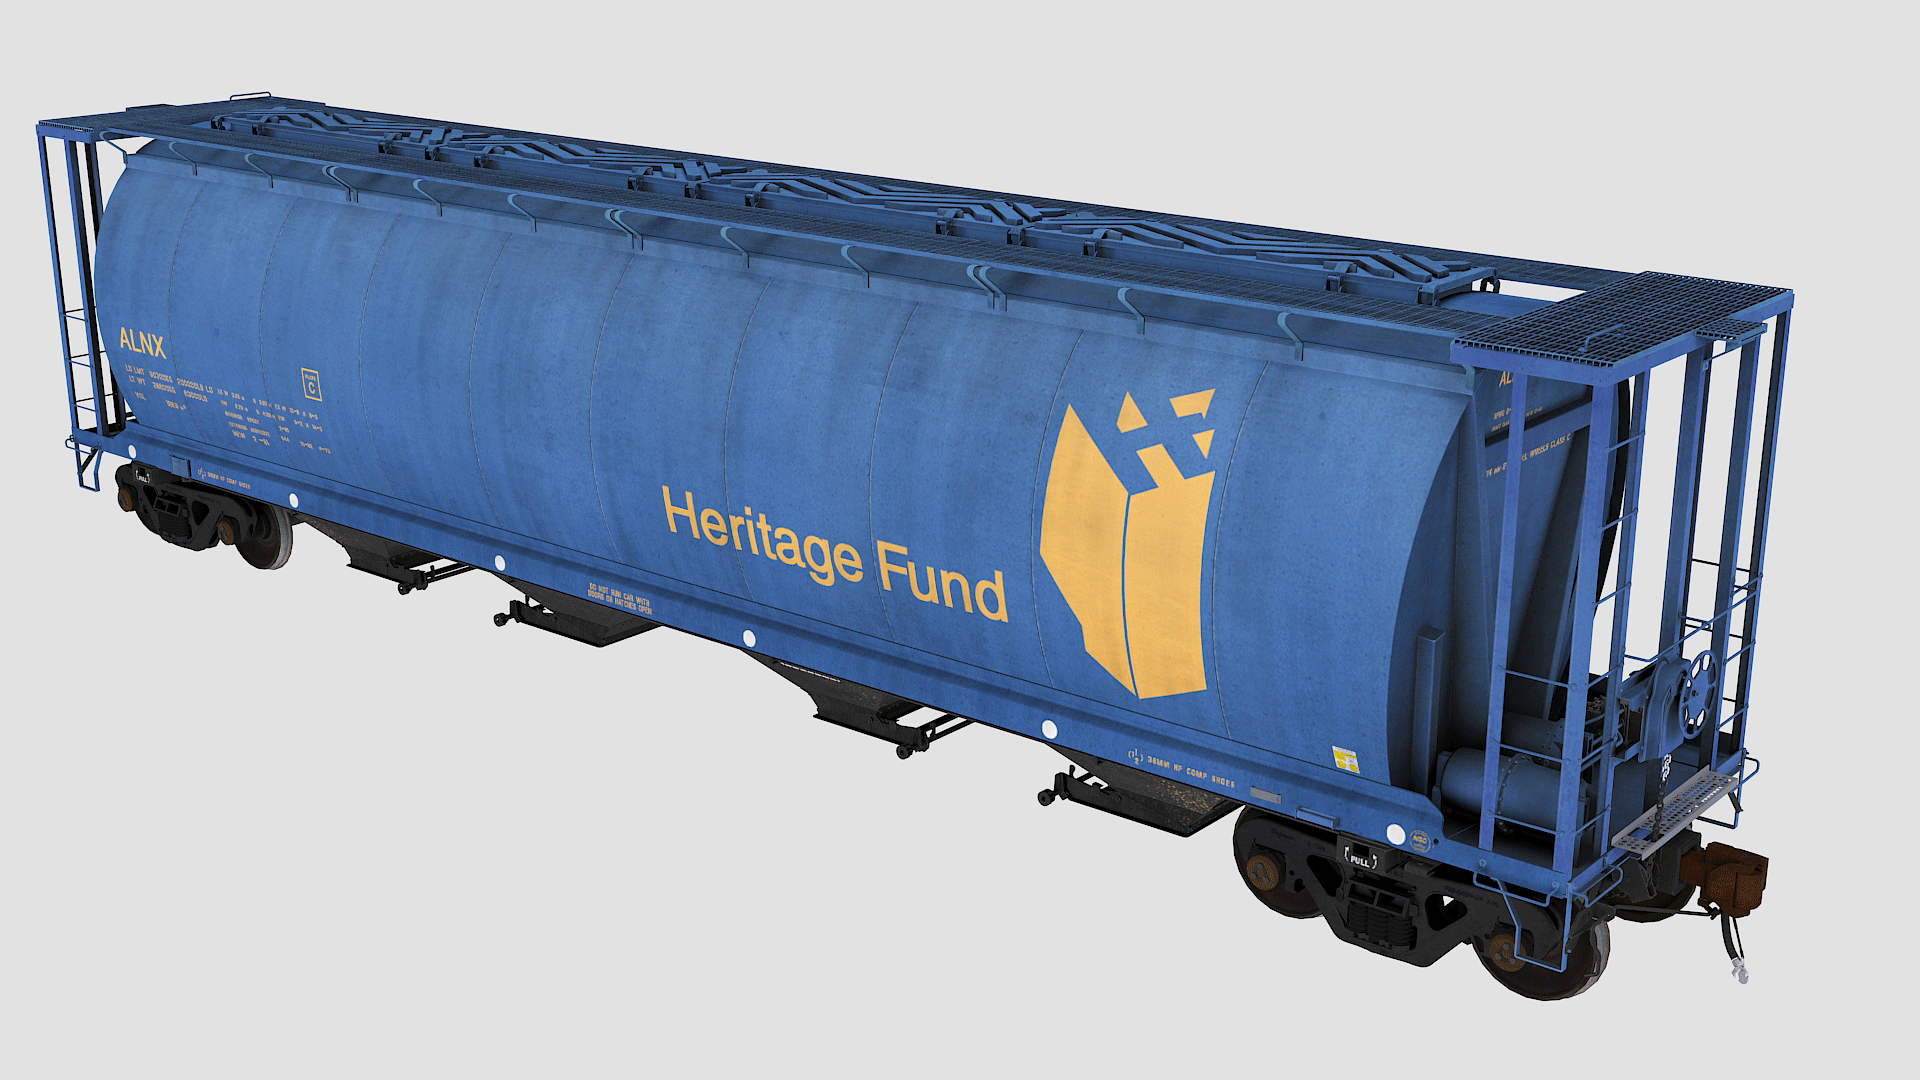 Alnx covered hopper, rolling stock